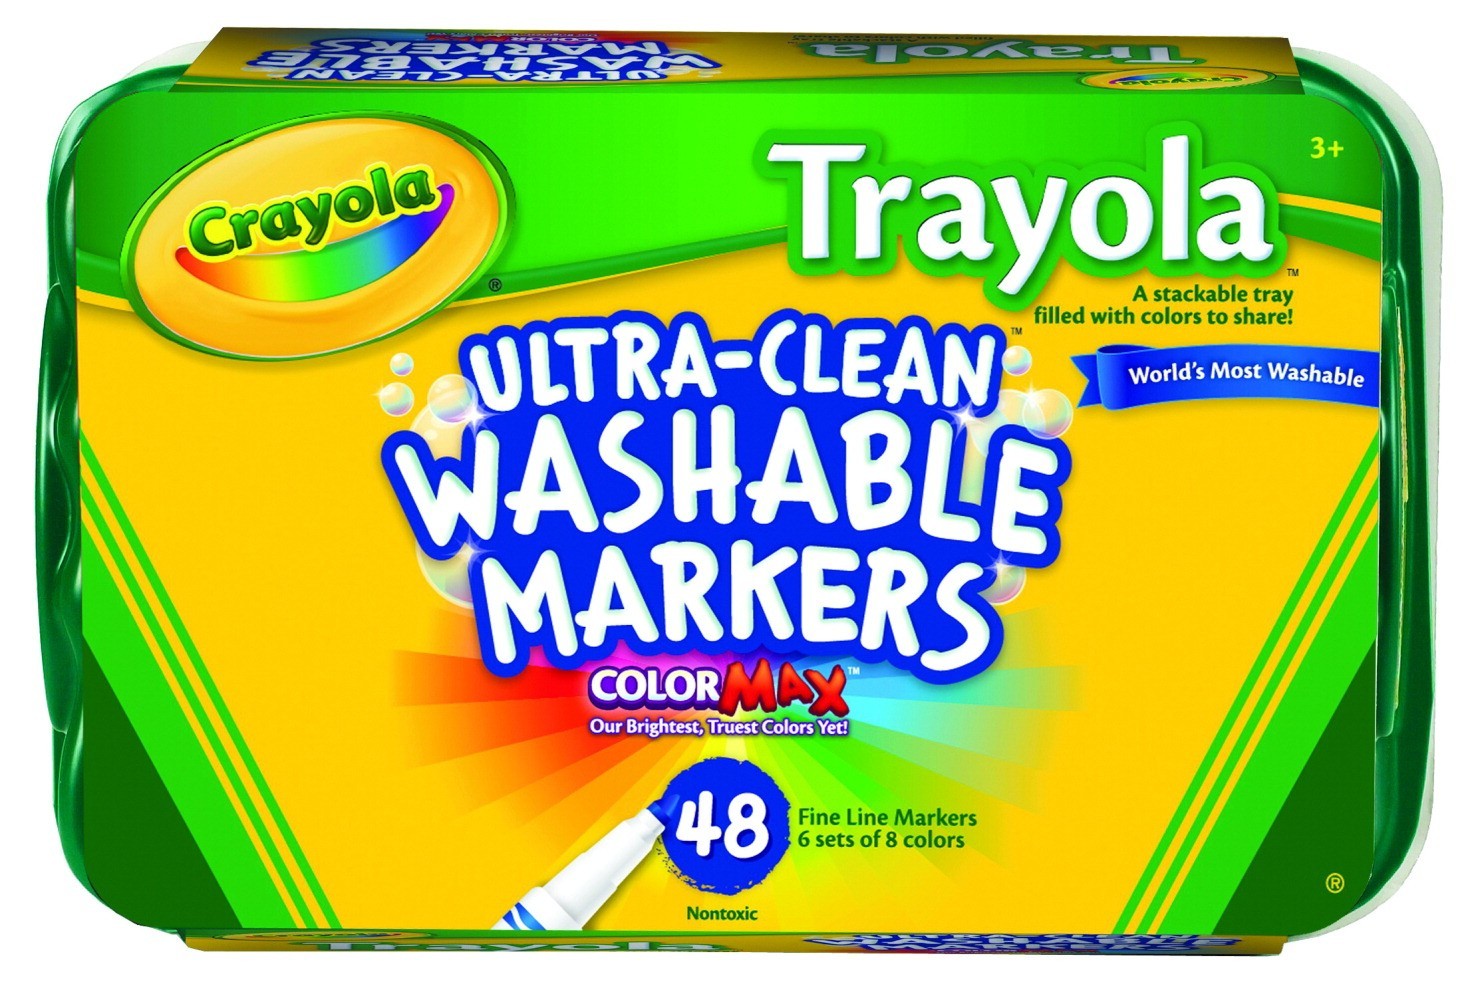 Crayola Trayola Ultra-Clean Washable Markers, Fine Tip, Assorted Bright Colors - 48/Pkg - CYO588214